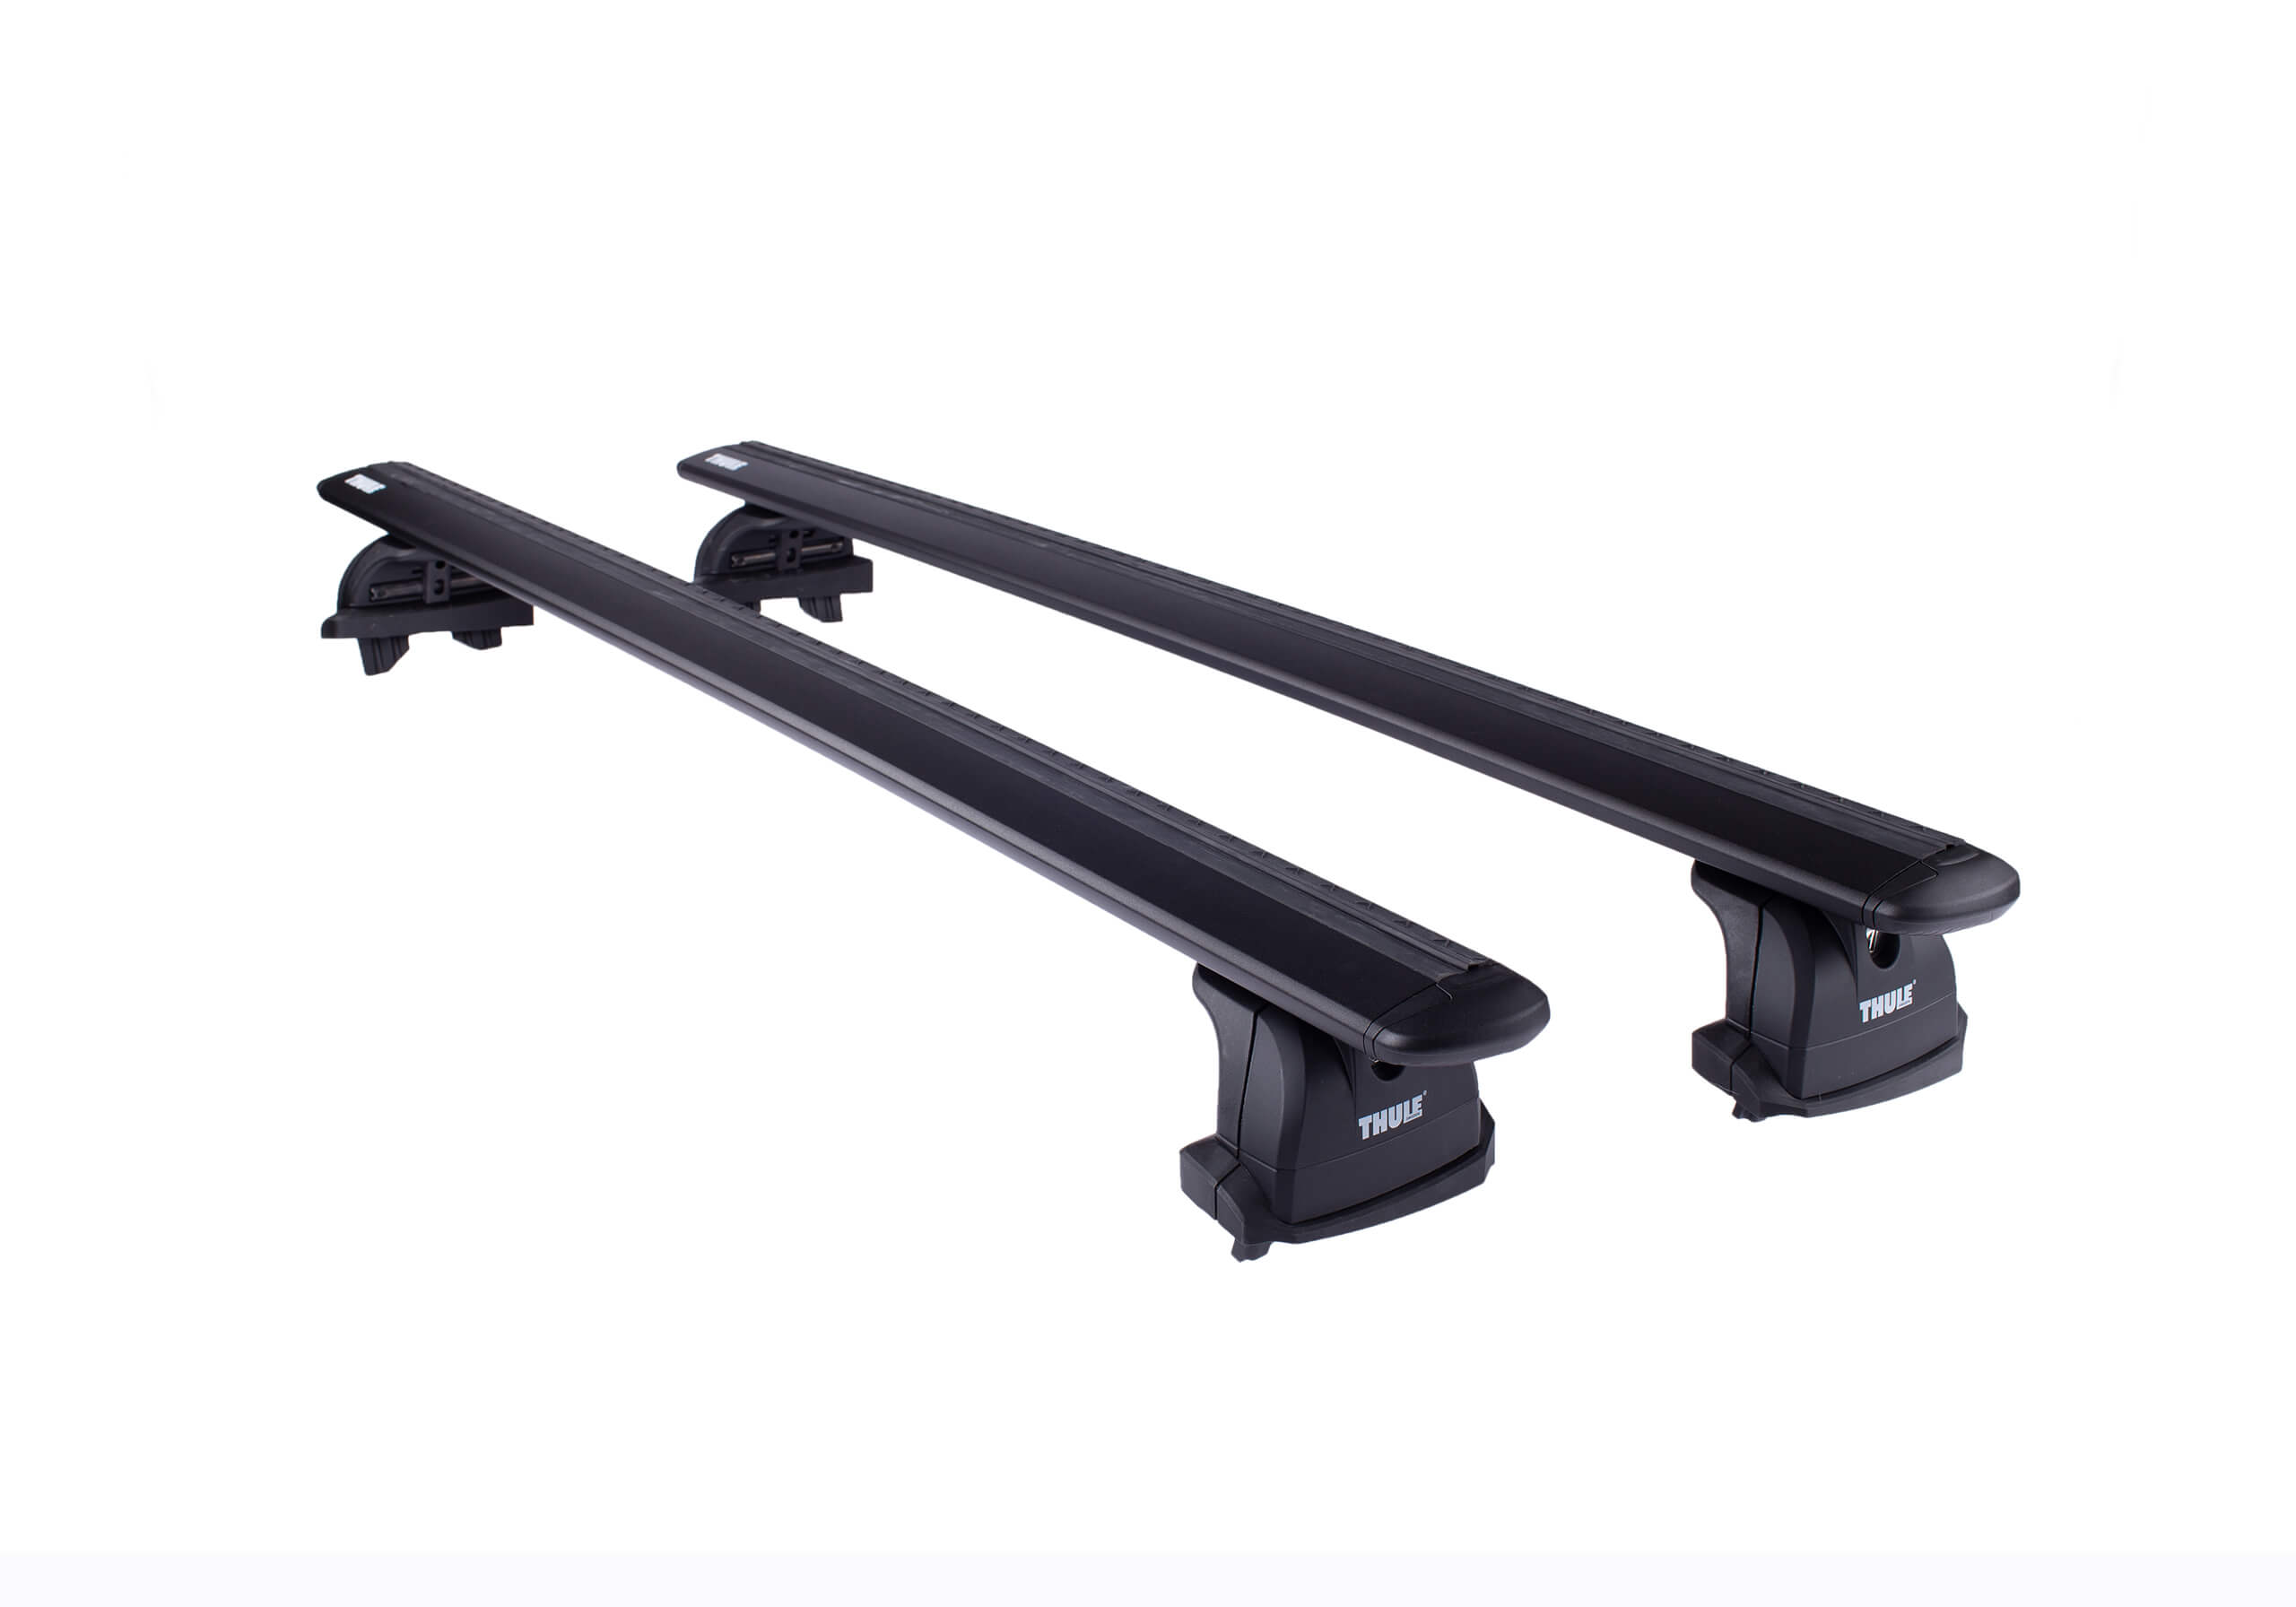 Ford Focus C-Max (2003 to 2010):Thule black WingBars package - 753, 7112B, 3015